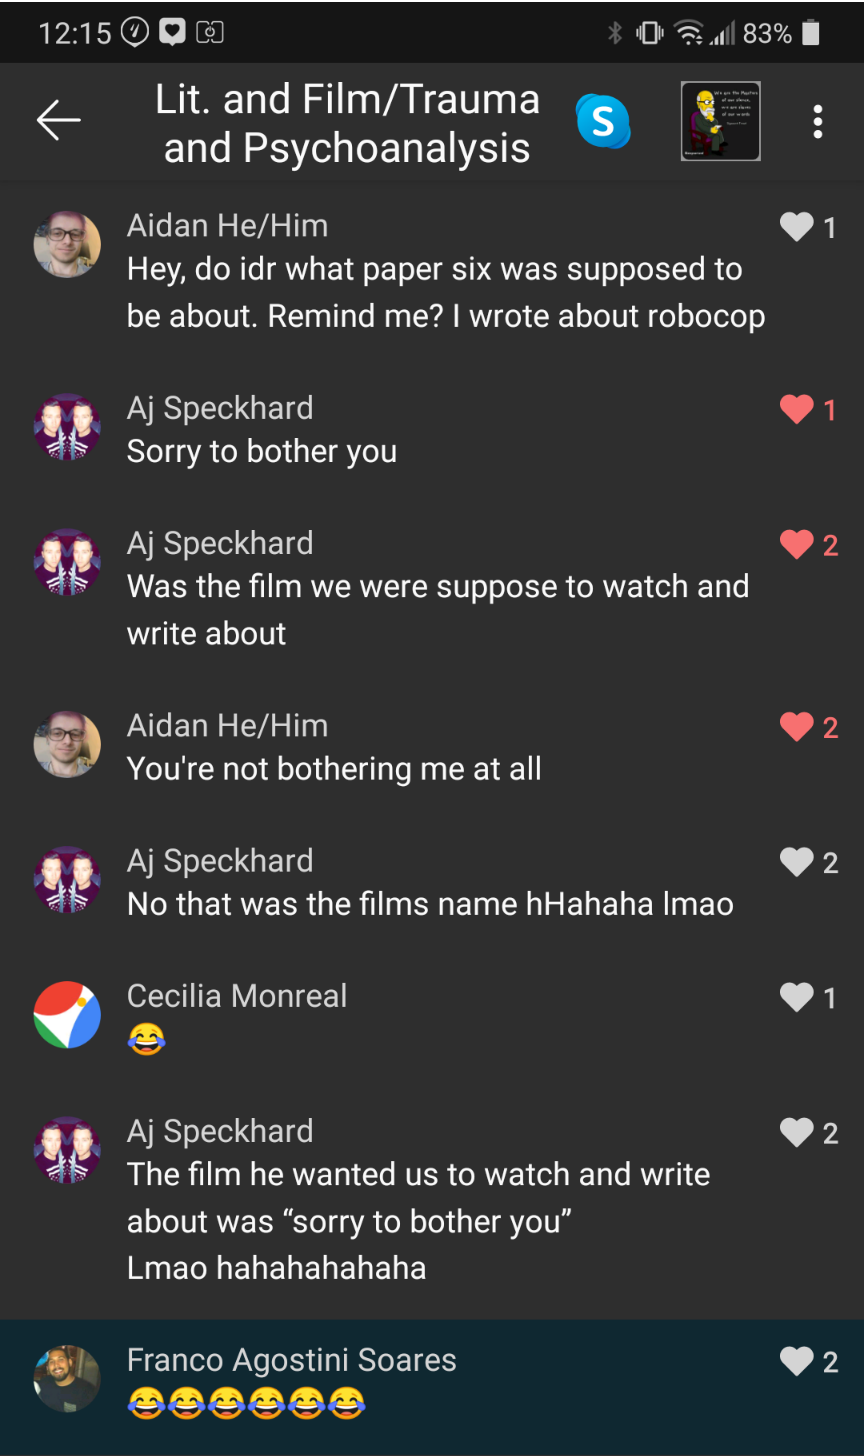 r/collegememes- college dank memes - screenshot - 0 83% Lit. and FilmTrauma and Psychoanalysis S Aidan HeHim Hey, do idr what paper six was supposed to be about. Remind me? I wrote about robocop Aj Speckhard Sorry to bother you 2 Aj Speckhard Was the film